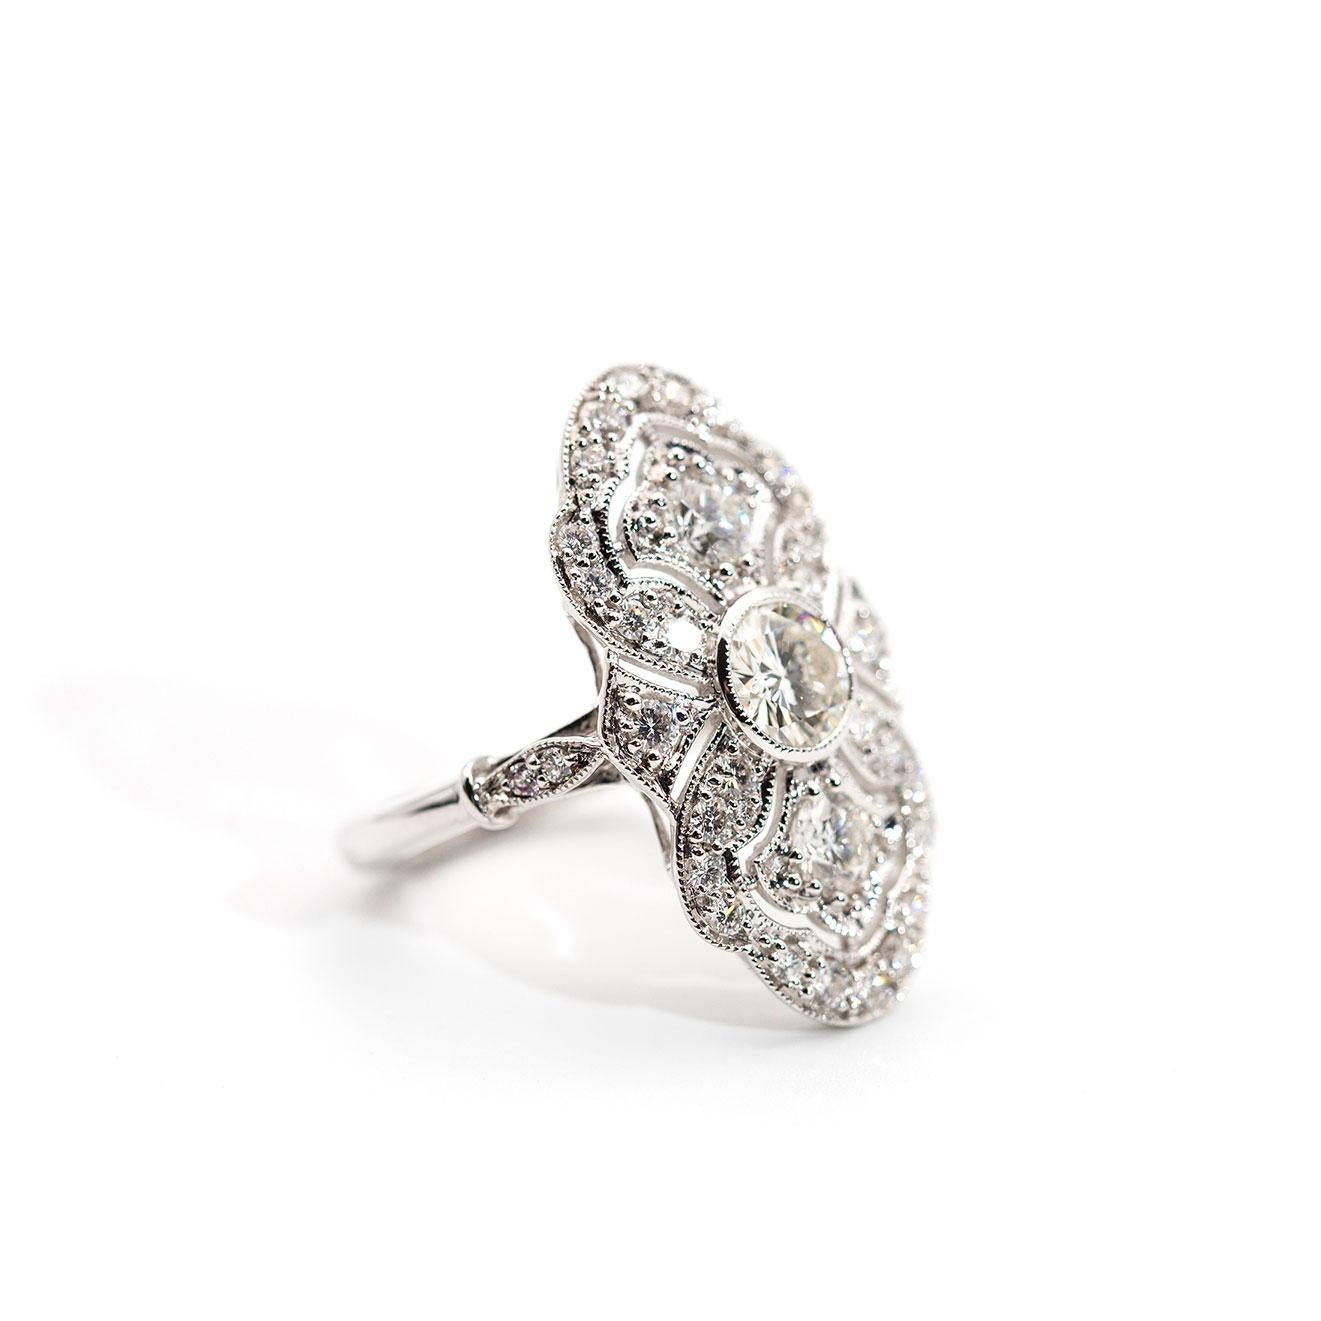 Forged in 18 carat white gold, this vintage-inspired ring features a gorgeous centrepiece certified 0.59 carat round brilliant cut diamond set in the centre of an intricately designed gallery embellished with two shimmering round brilliant diamonds